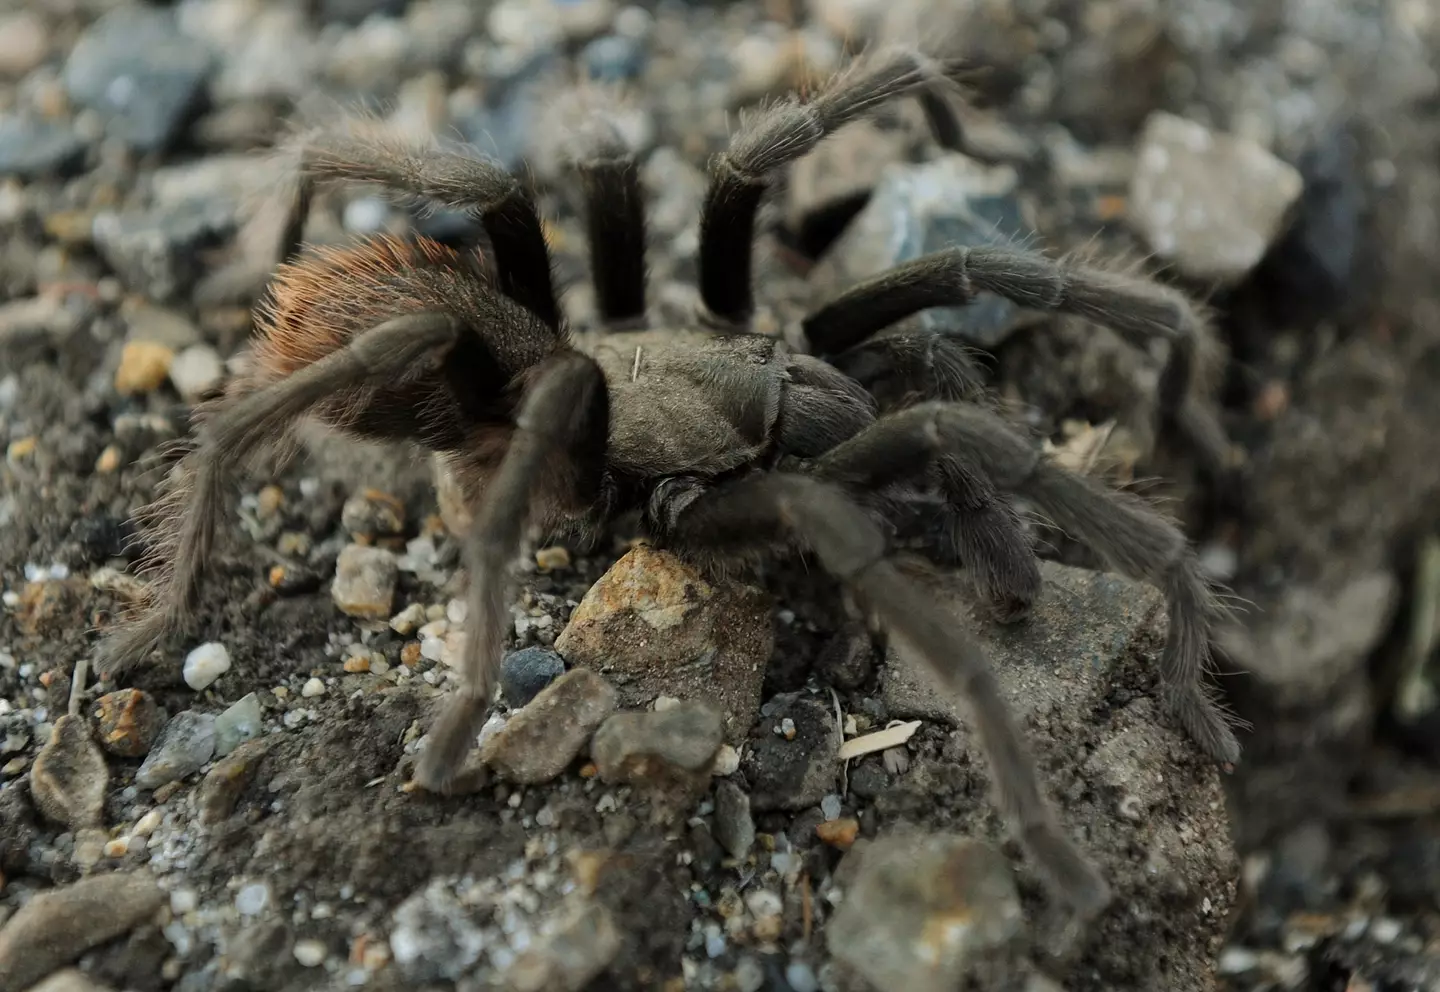 The NPS also explained in a press release guests can expect to see an increase in tarantulas.